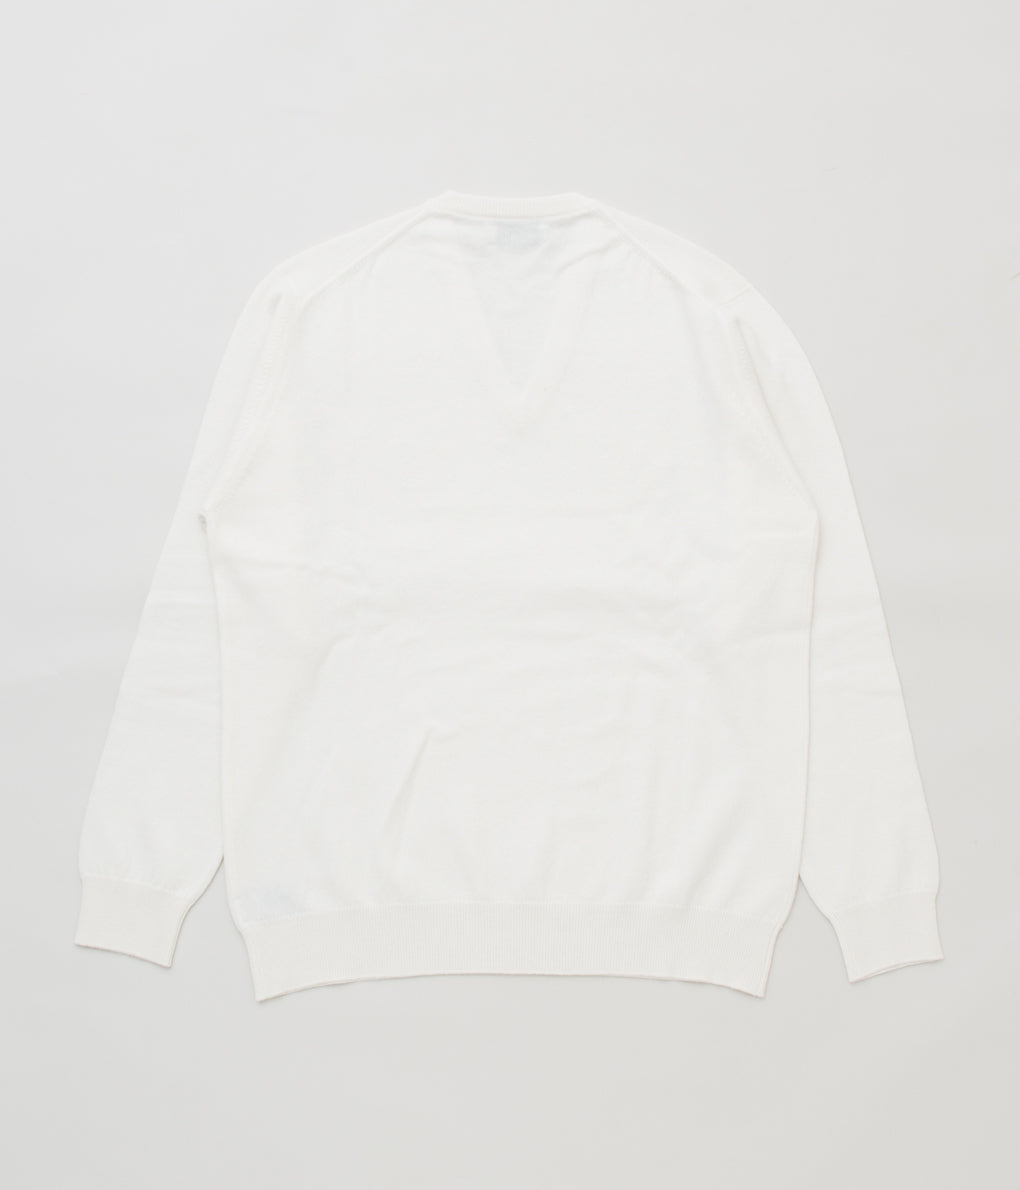 JOHNSTONS OF ELGIN"CLASSIC CASHMERE VEE NECK SWEATER"(WHITE)